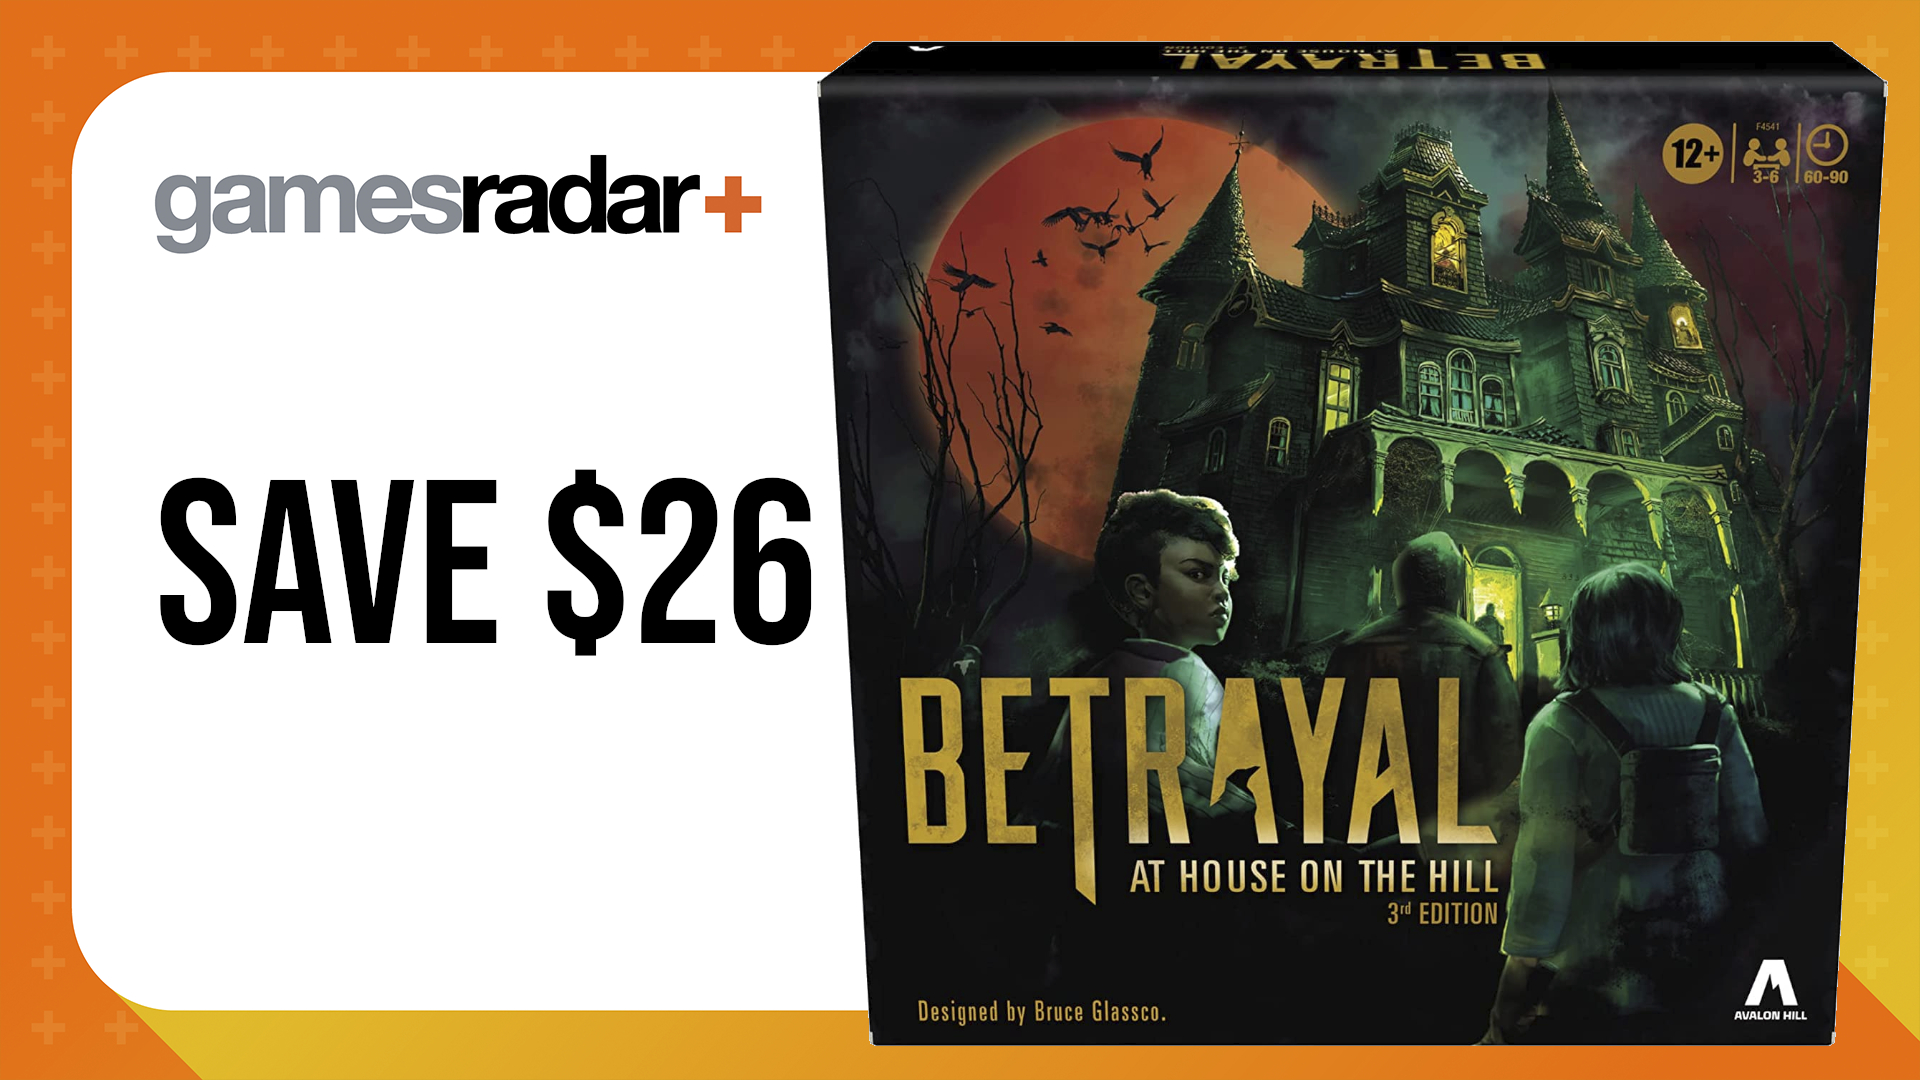 Black Friday board game deals with Betrayal at House on the Hill 3rd edition